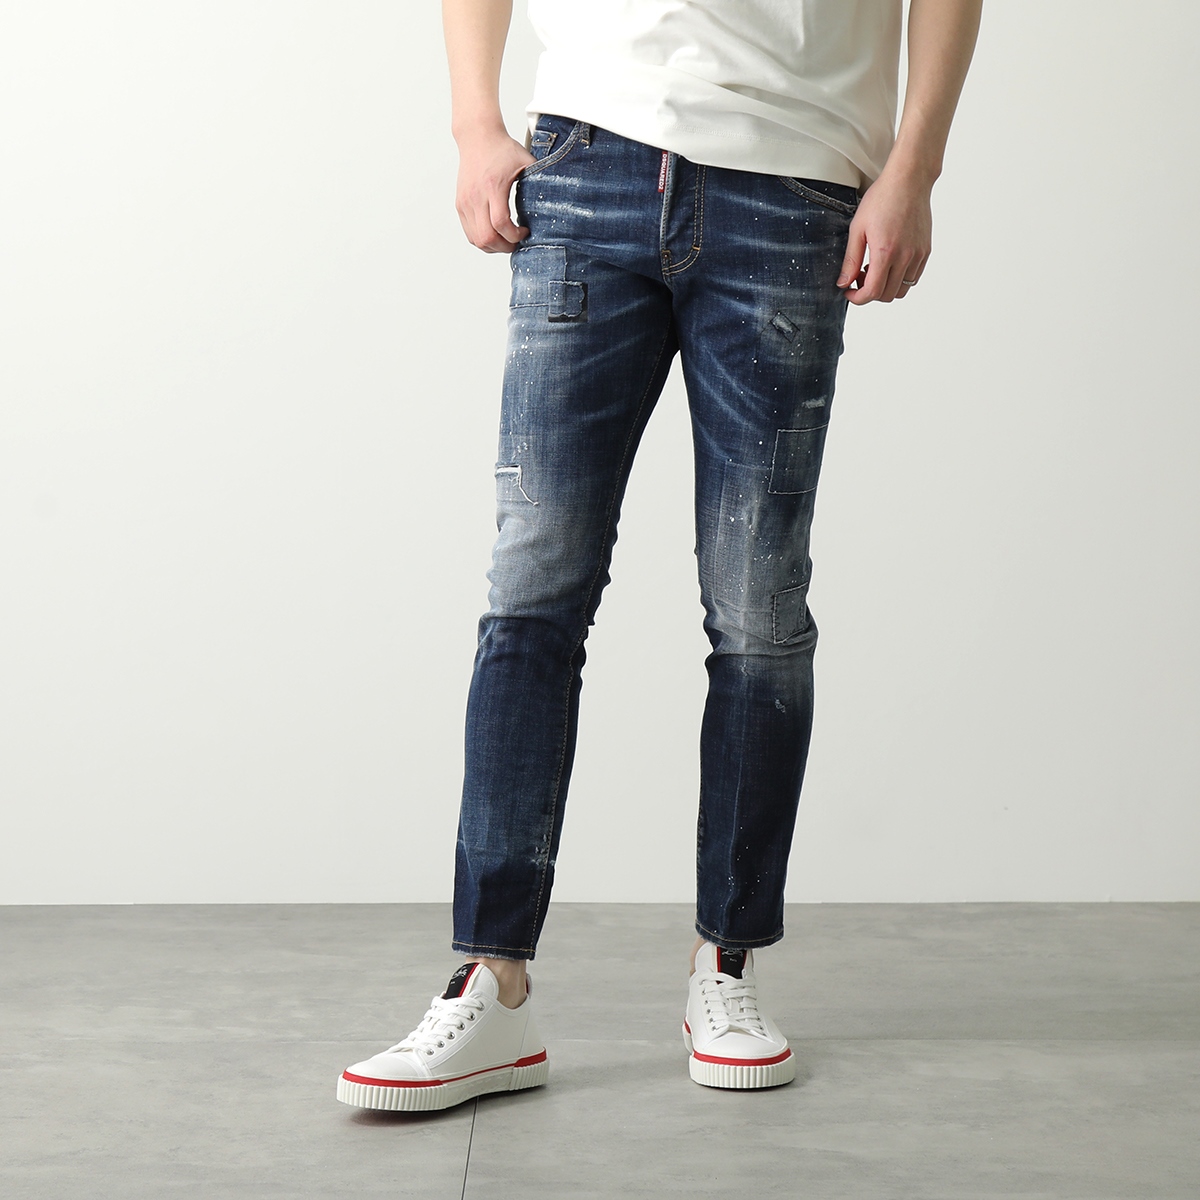 DSQUARED2 ディースクエアード ジーンズ Skater Jean S71LB1368 S30...